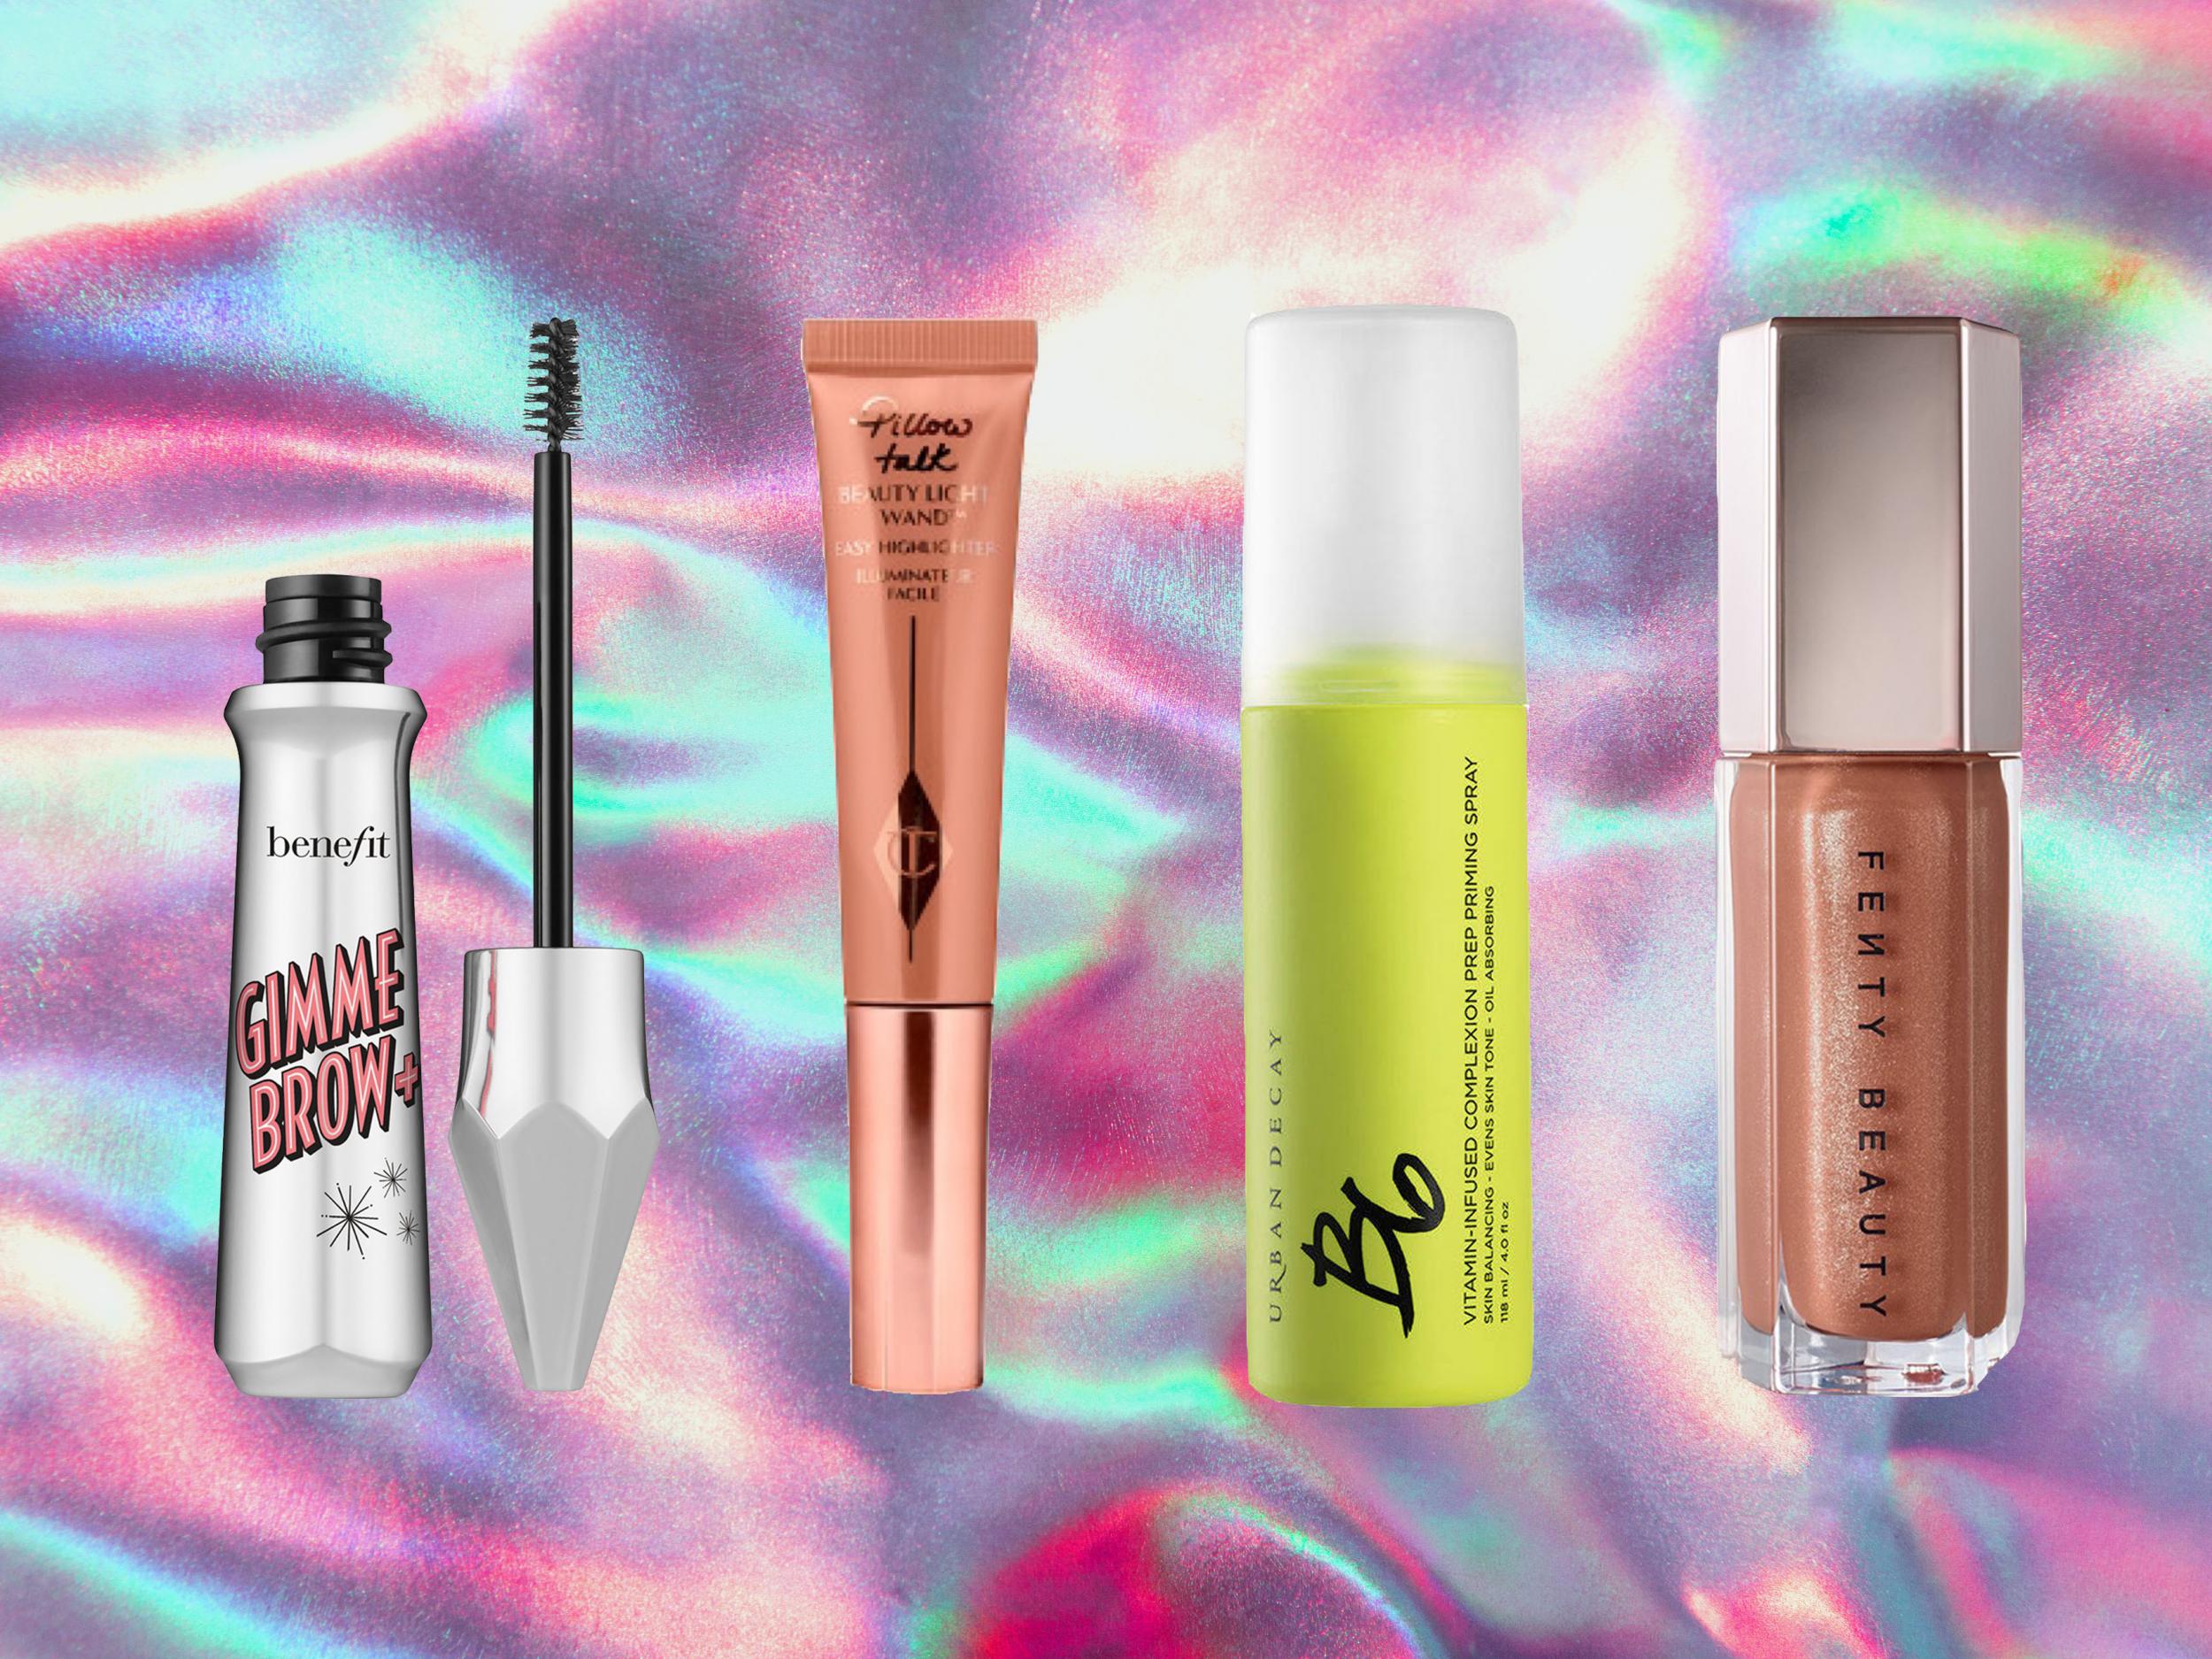 From Benefit's gimme brows to Urban Decay's priming spray, these are the products you need